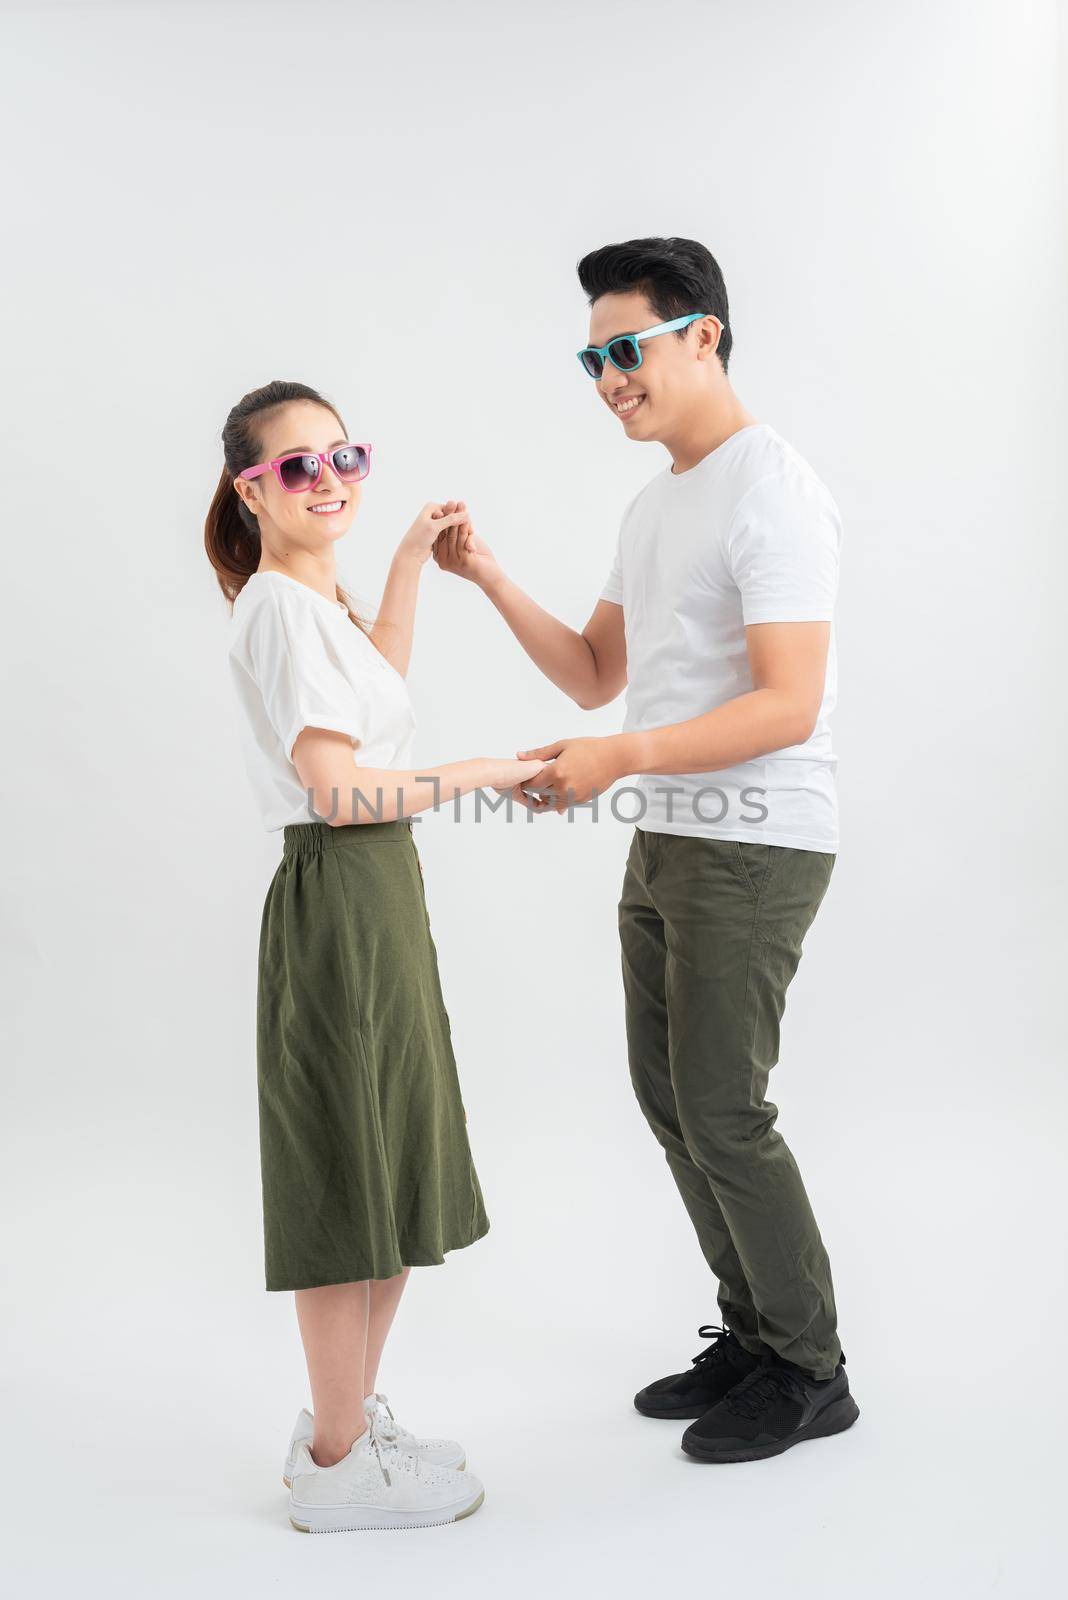 smiling young couple dancing and holding hands, isolated on white